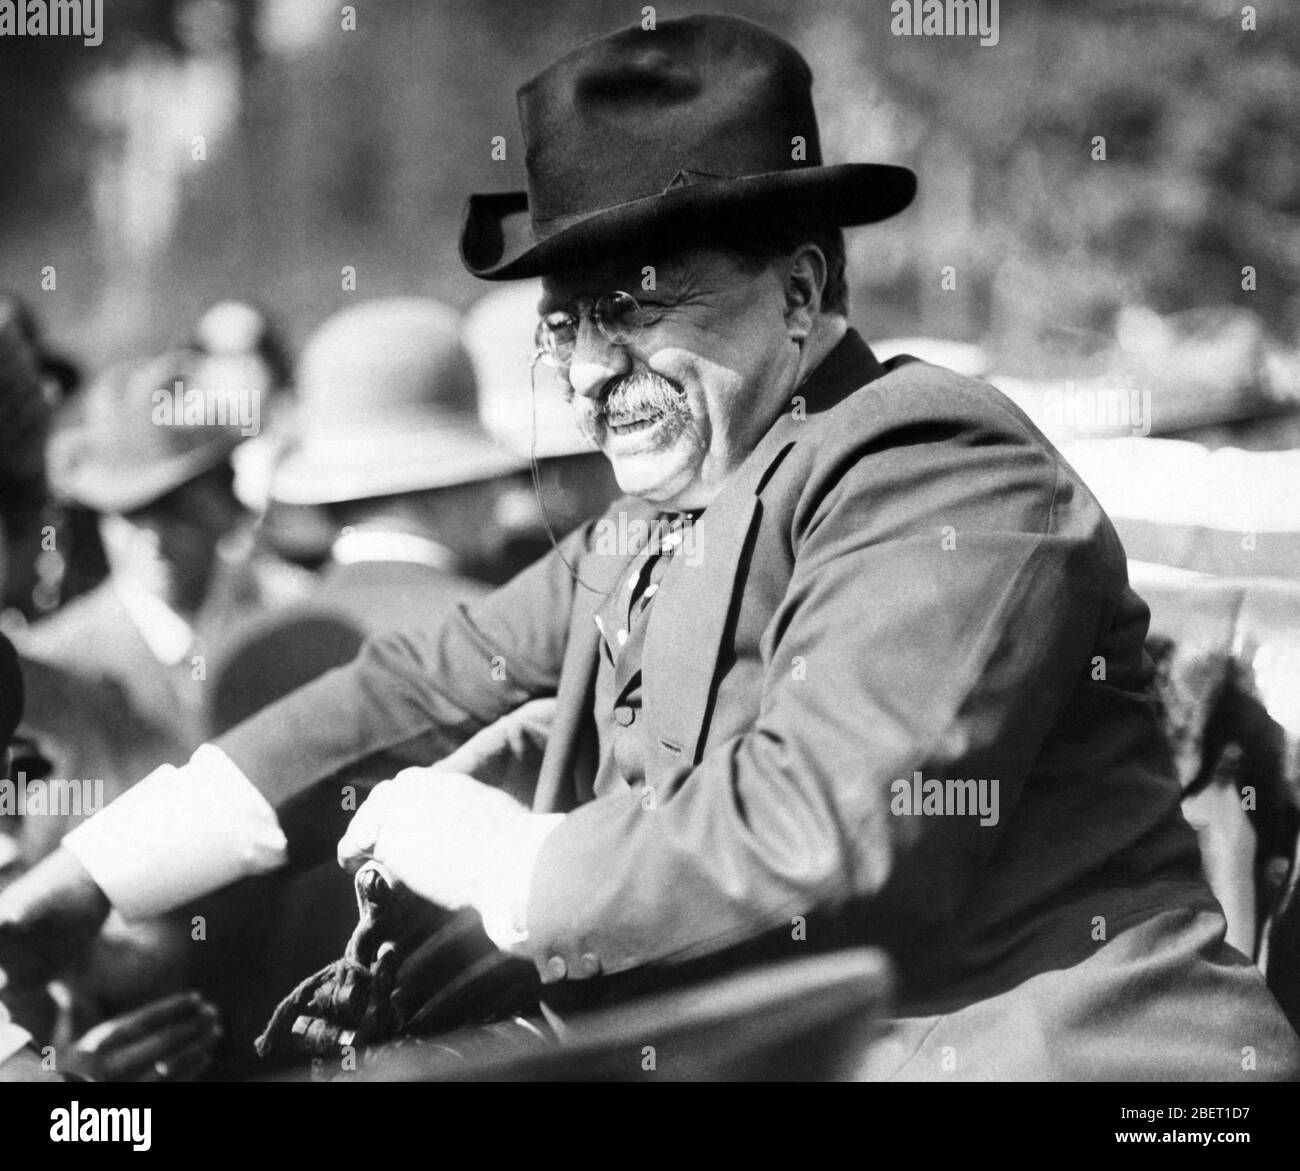 Theodore Roosevelt riding in a car with a big smile on his face, 1910. Stock Photo